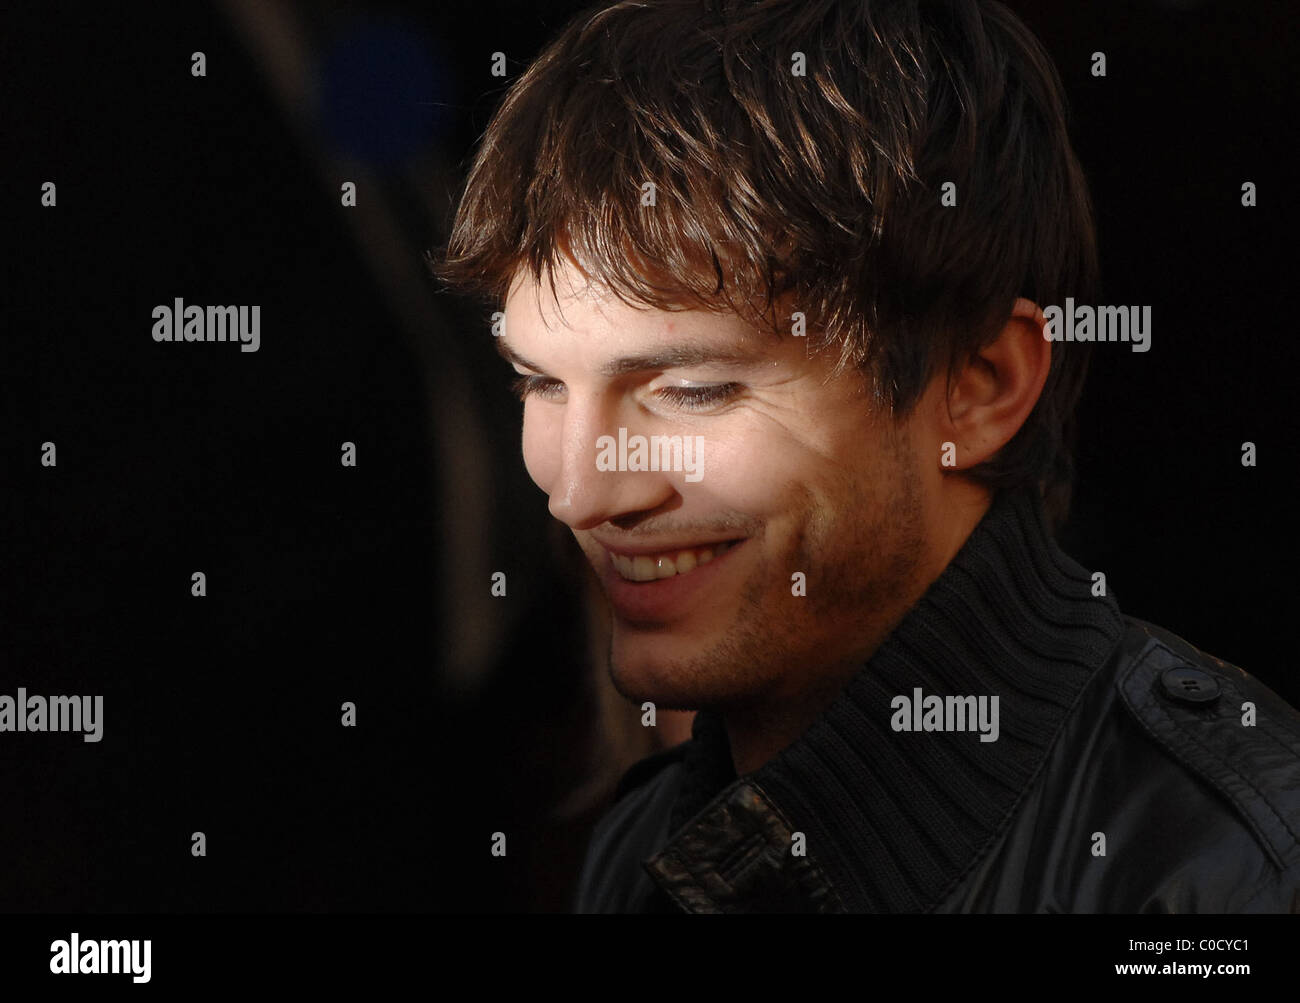 Ashton Kutcher at the premiere of 'What Happens In Vegas' at Odeon,Leicester Square London,England- 22.04.08  : Stock Photo